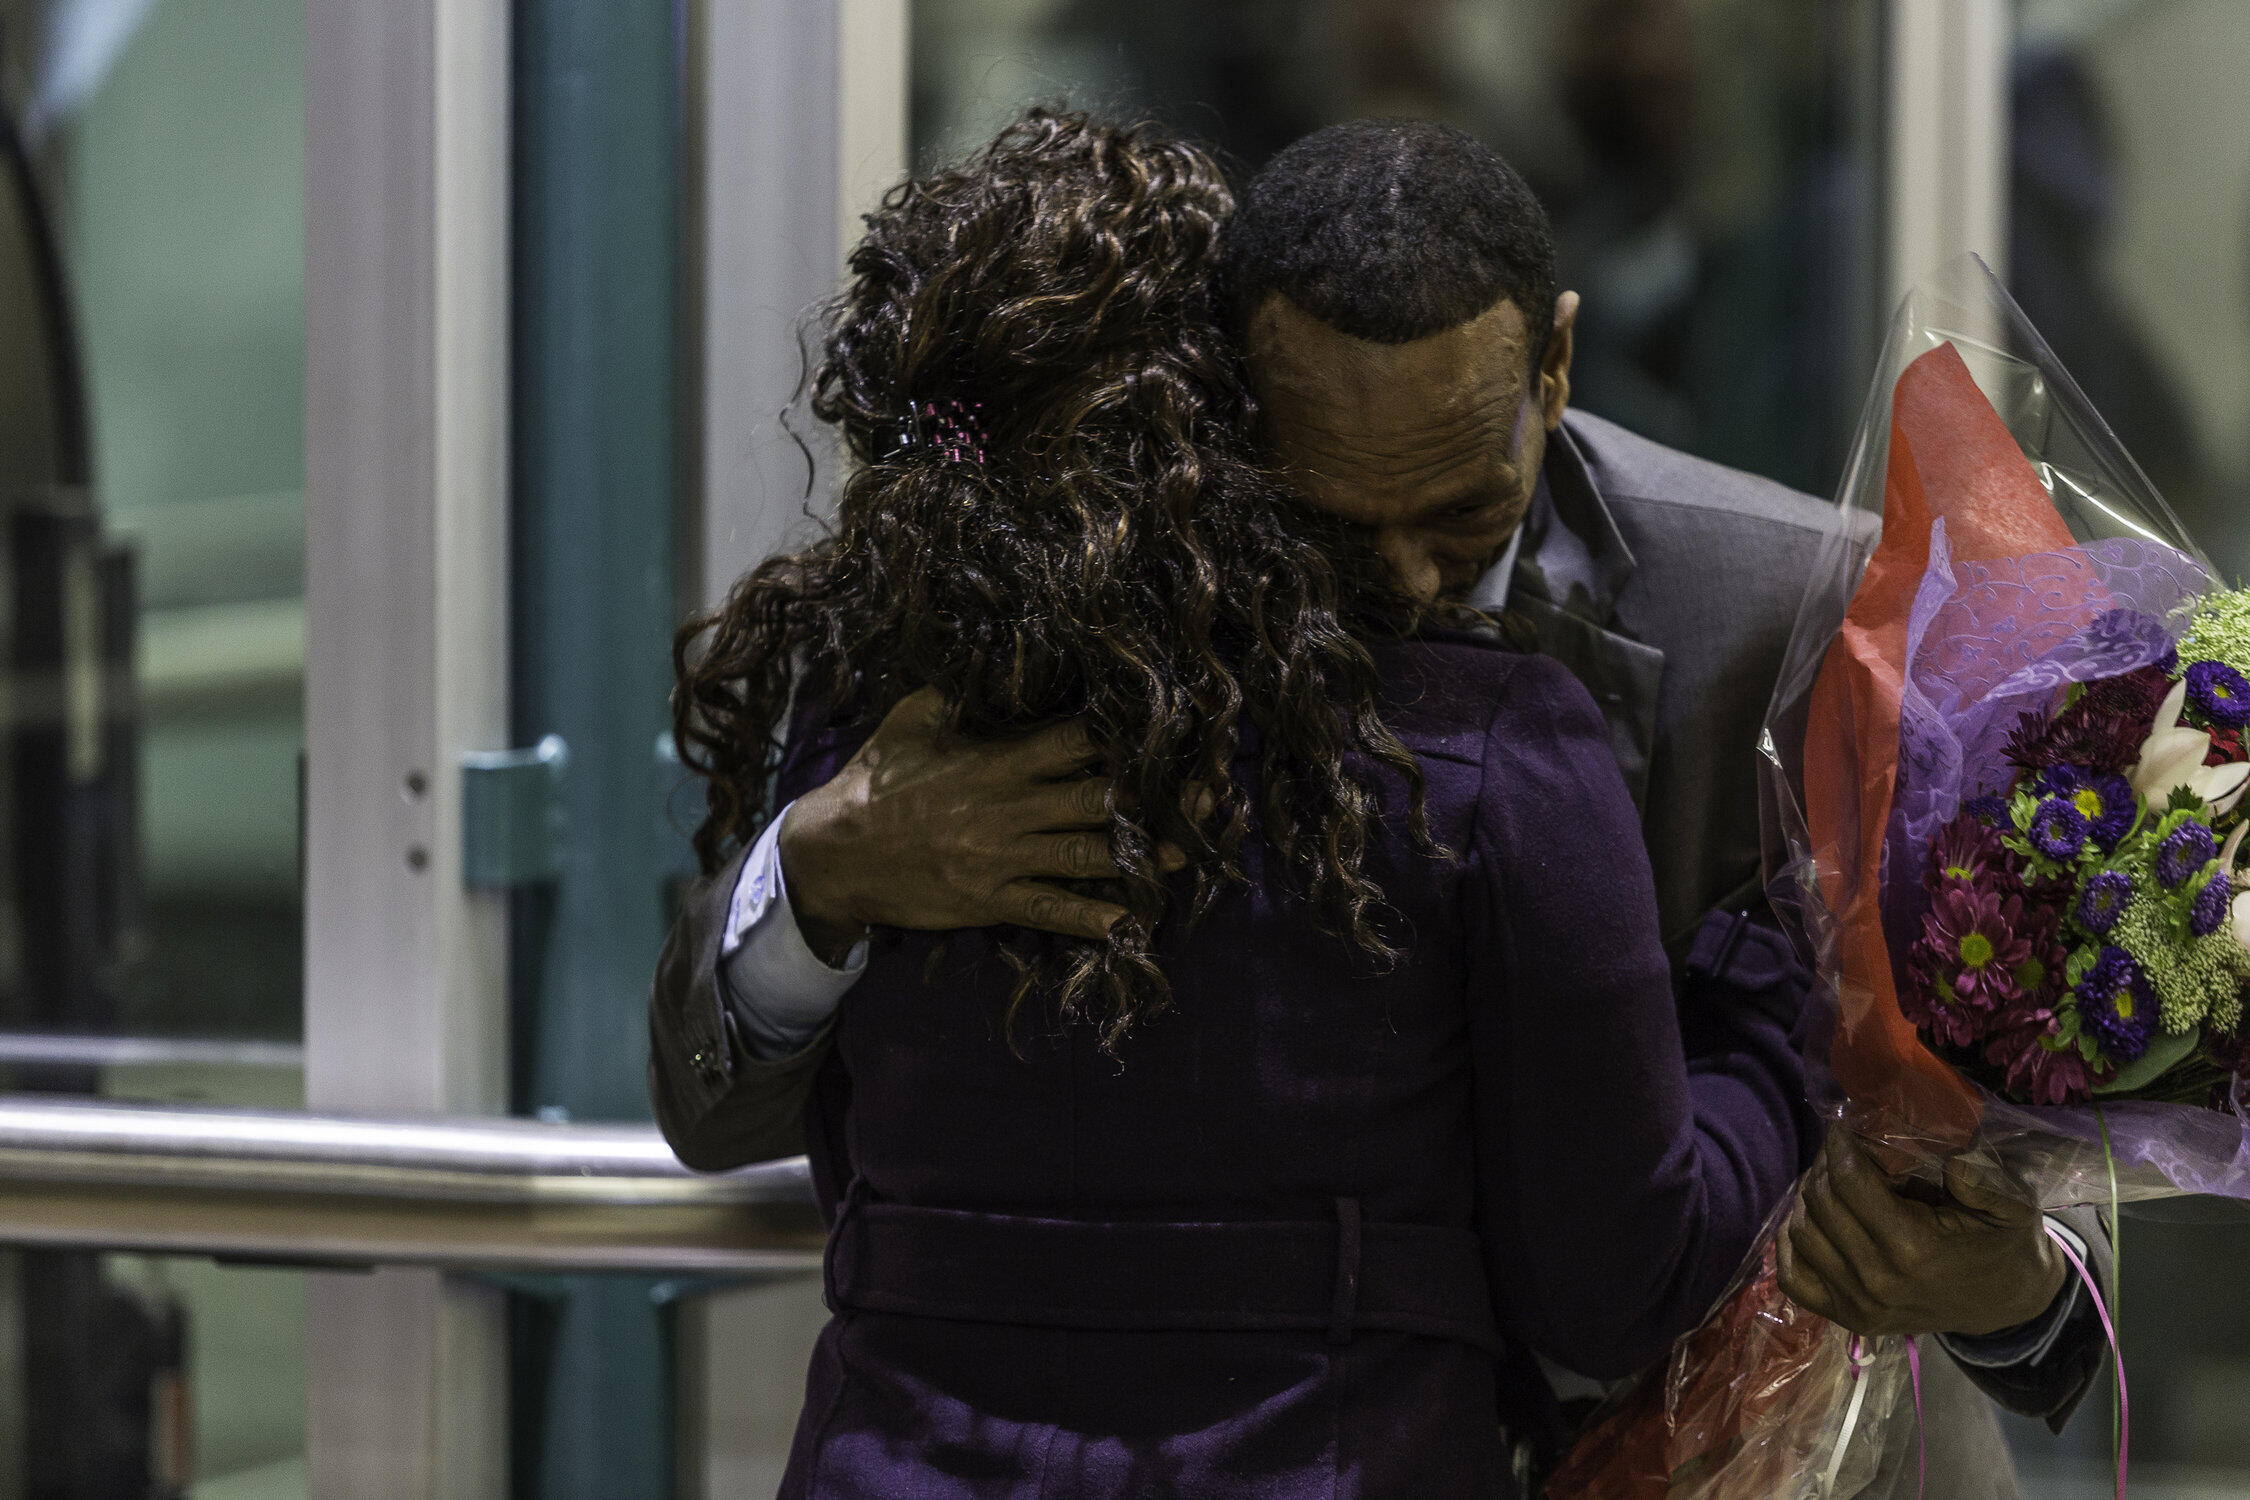 A Somali father holiding a bouquet of flowers hugs his daughter just after they are reunited in Seattle's SeaTac airport